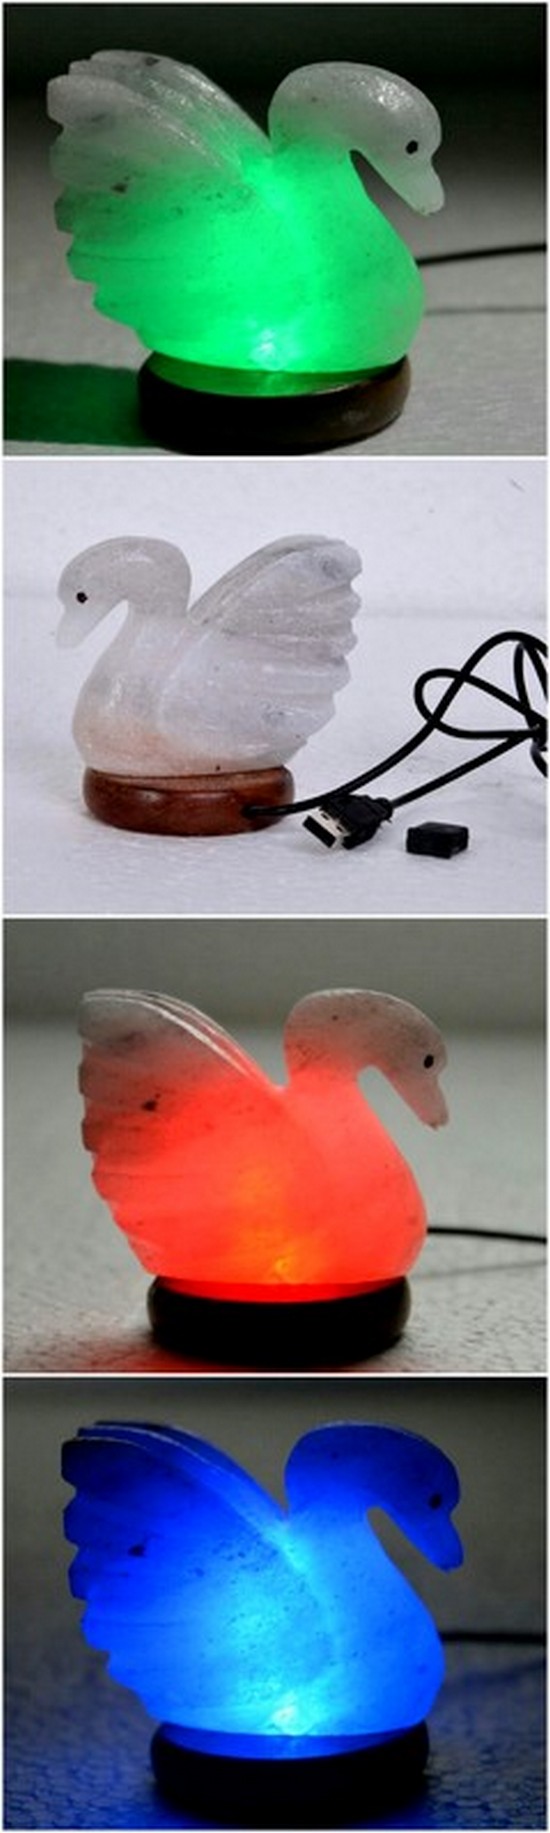 USB CRAFTED DUCK SHAPED MULTICOLORED WHITE SALT LAMP